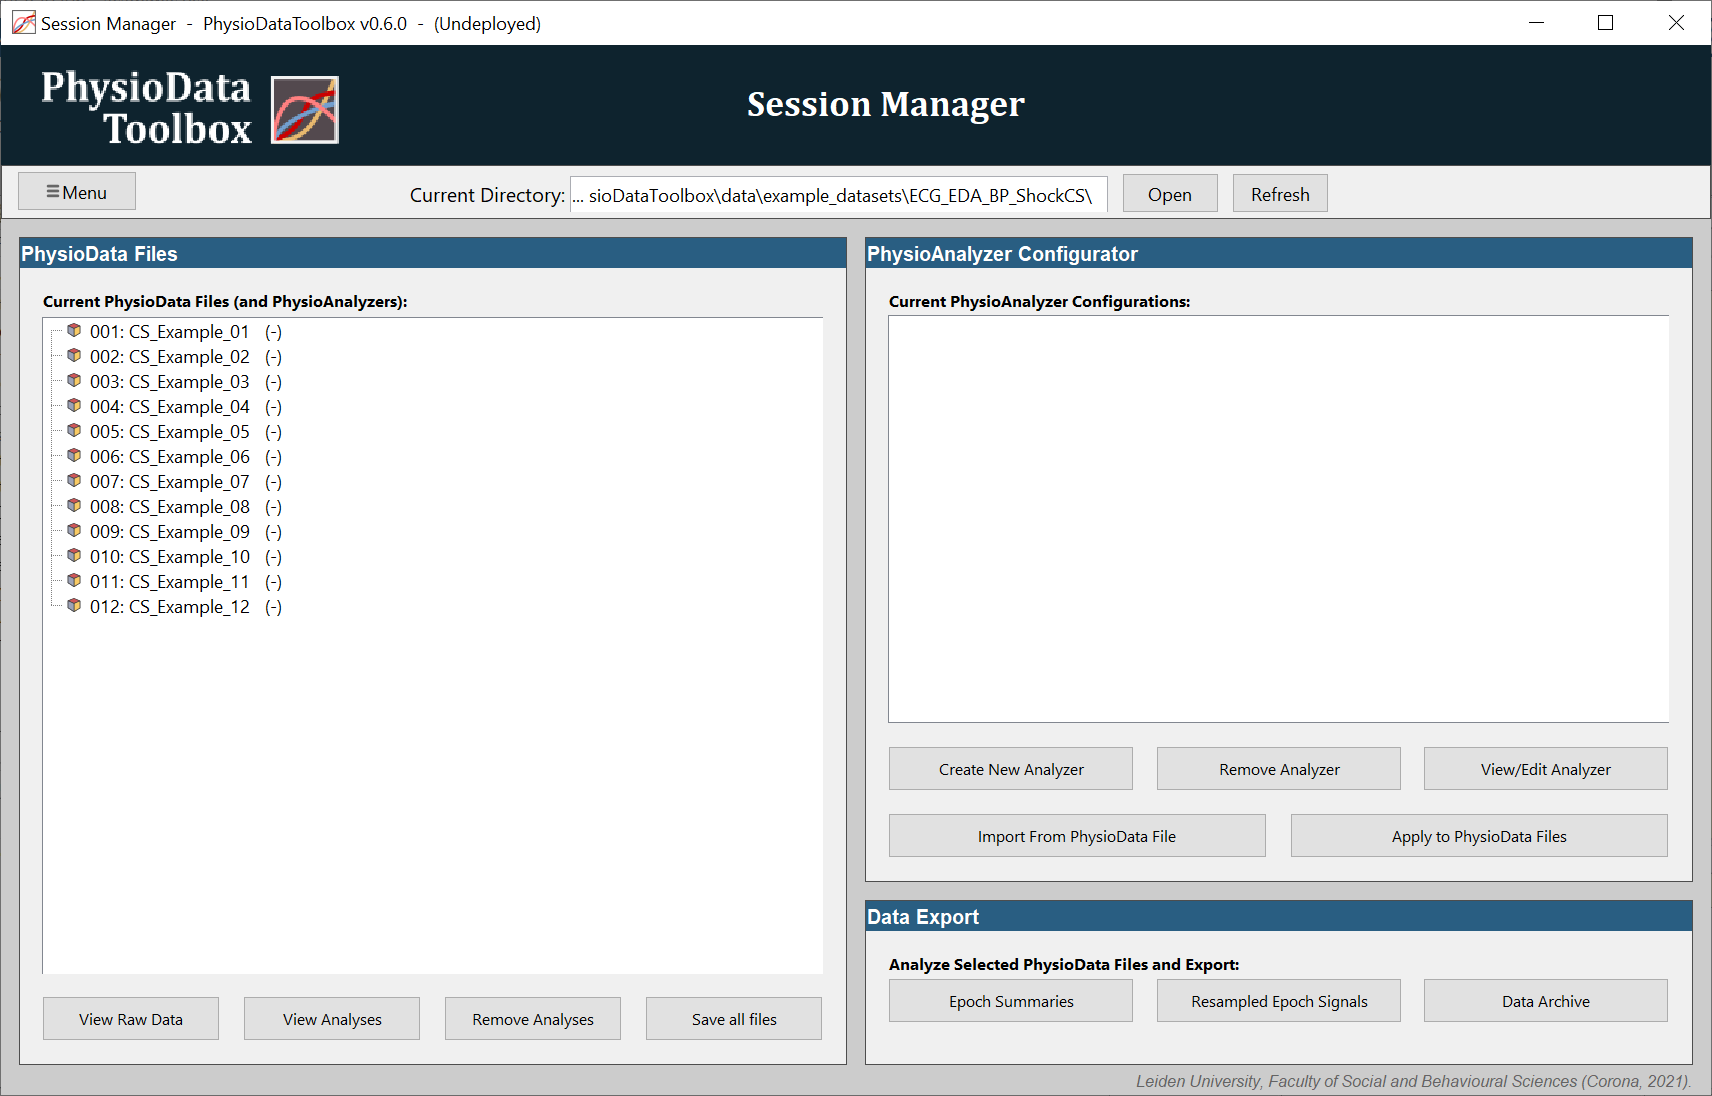 Session Manager